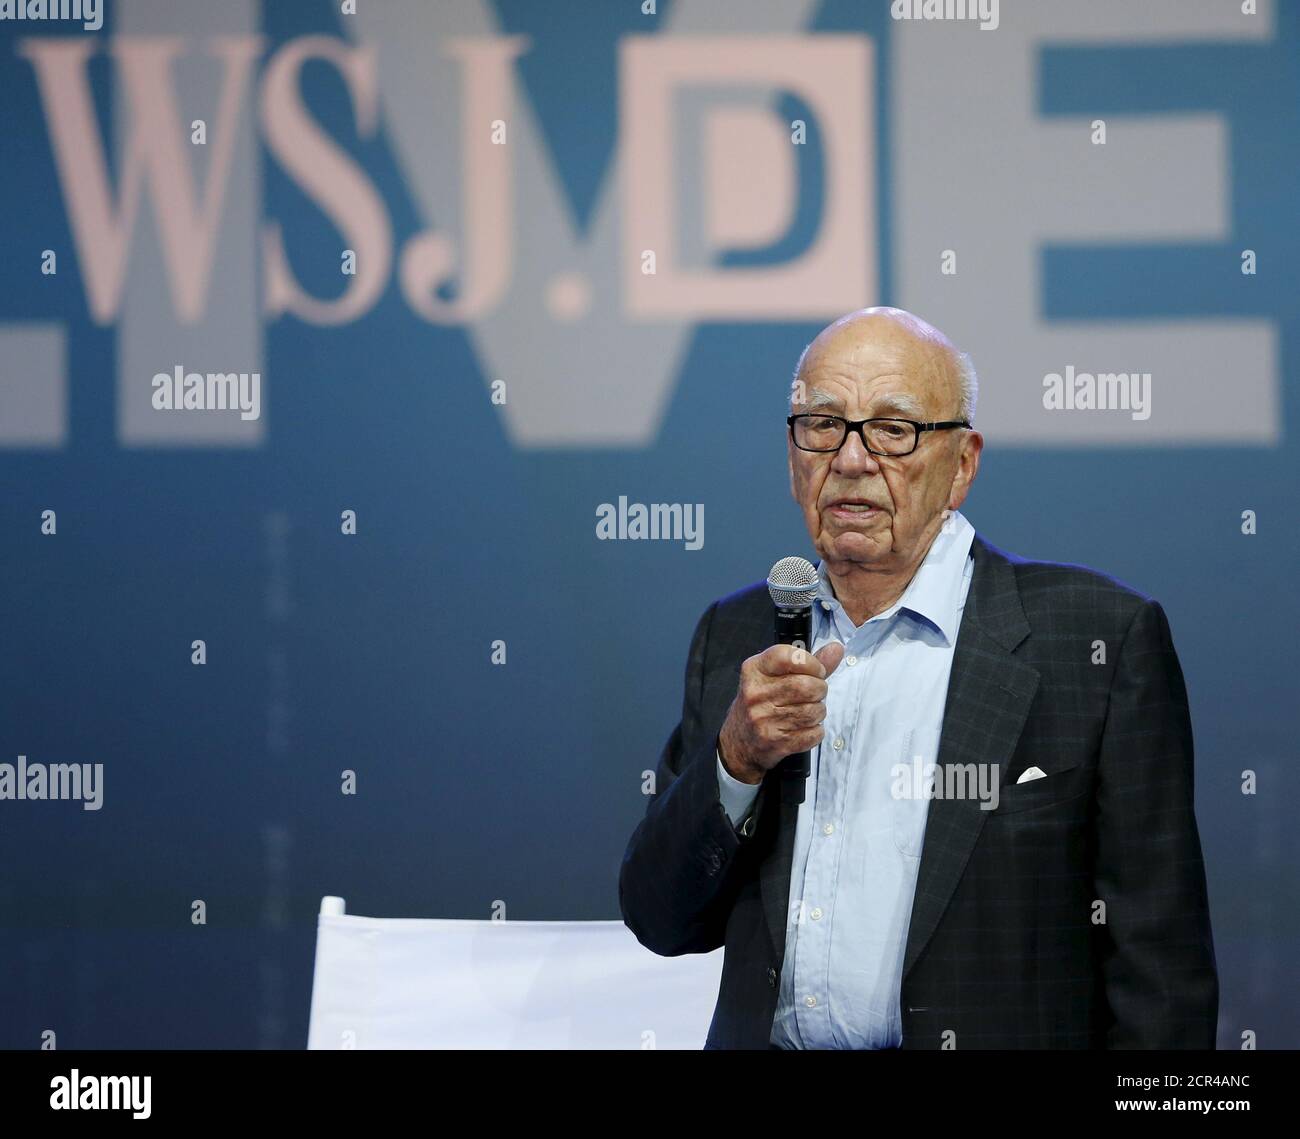 News Corp Executive Chairman Rupert Murdoch speaks at the start of the Wall Street Journal Digital Live (WSJDLive) conference at the Montage hotline Laguna Beach, California   October 19, 2015.      REUTERS/Mike Blake Stock Photo